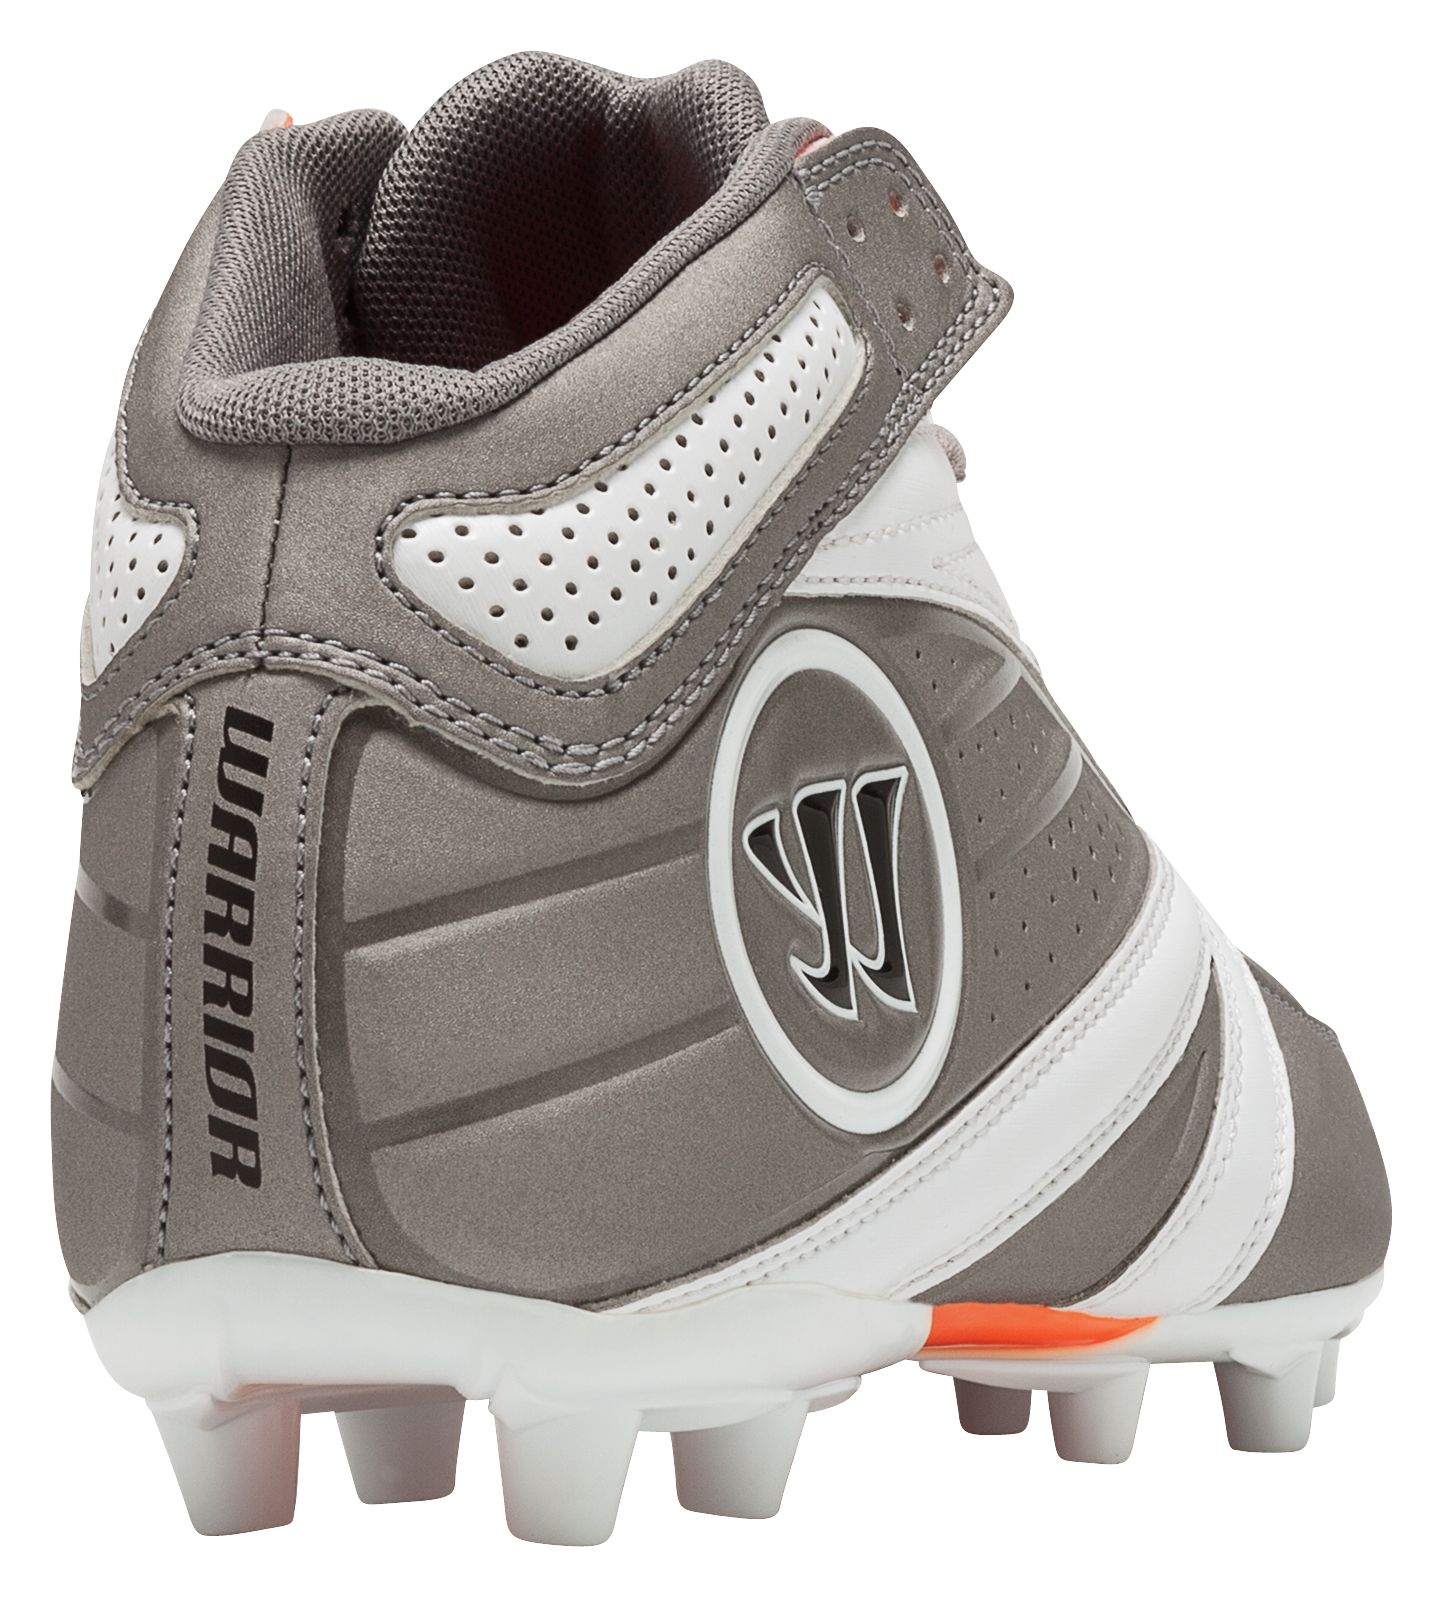 Second Degree 3.0 Cleat, Grey with White image number 2